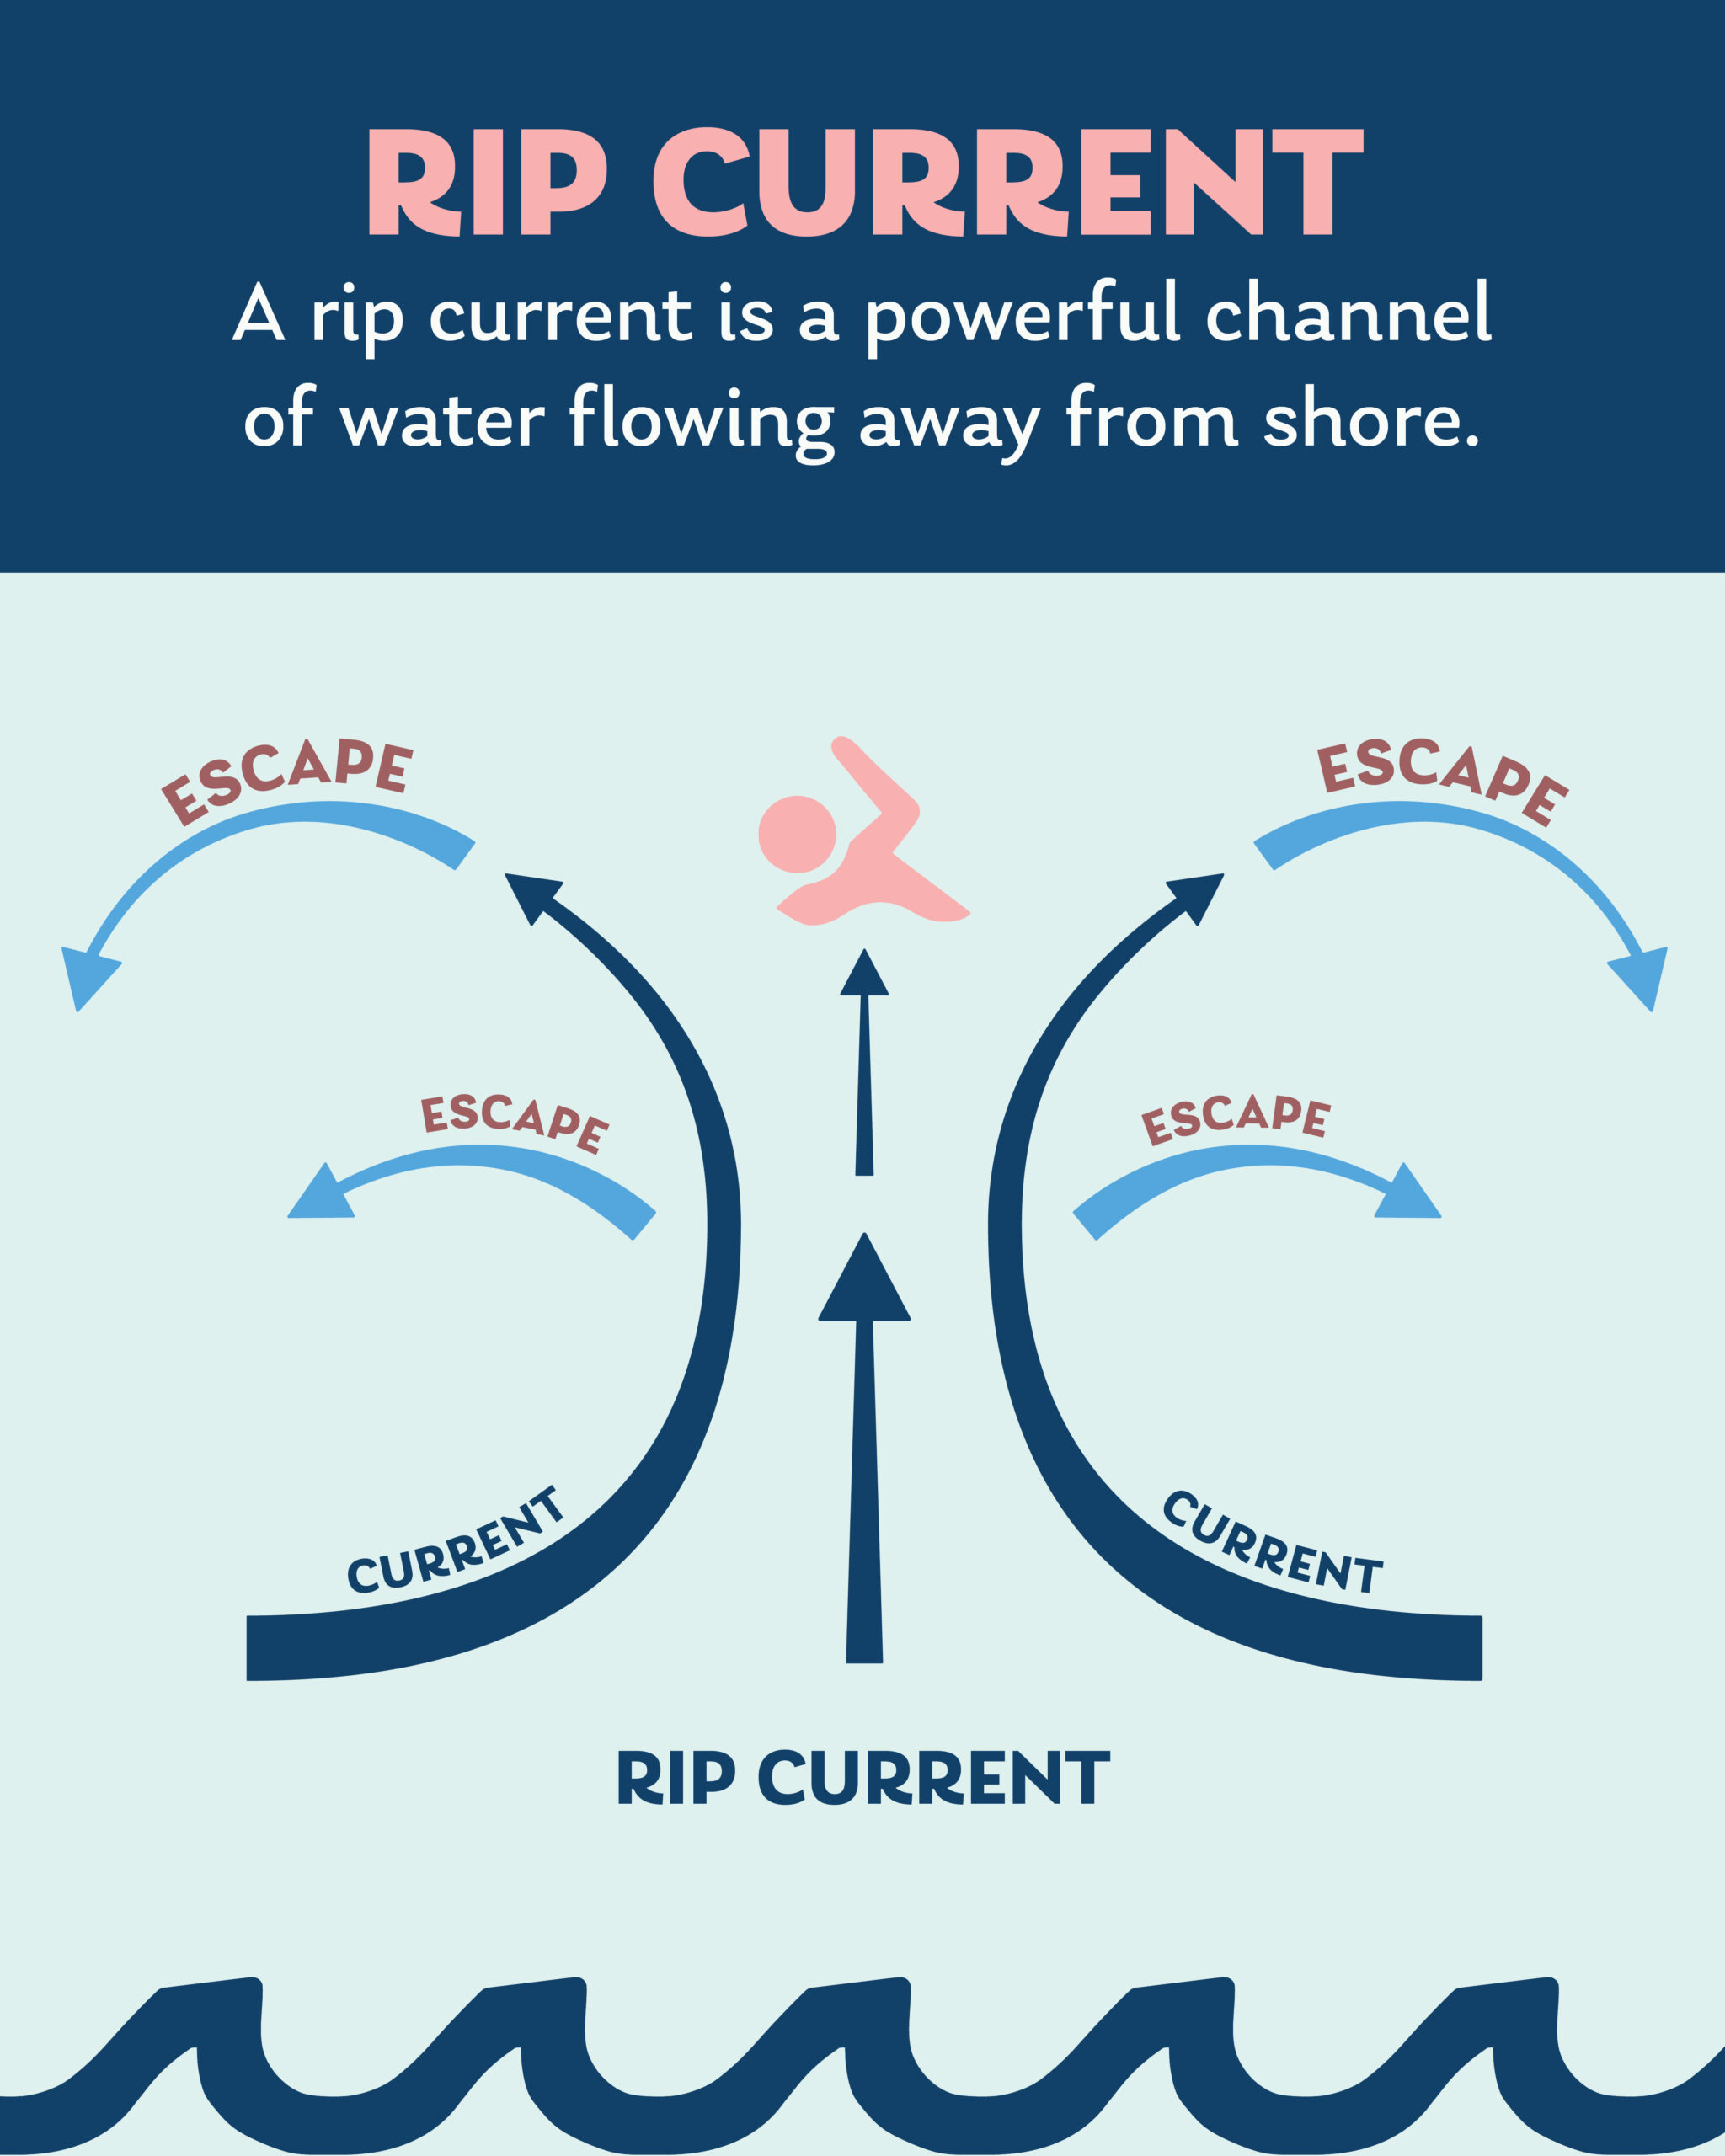 rip current is a powerful channel of water flowing away from shore.